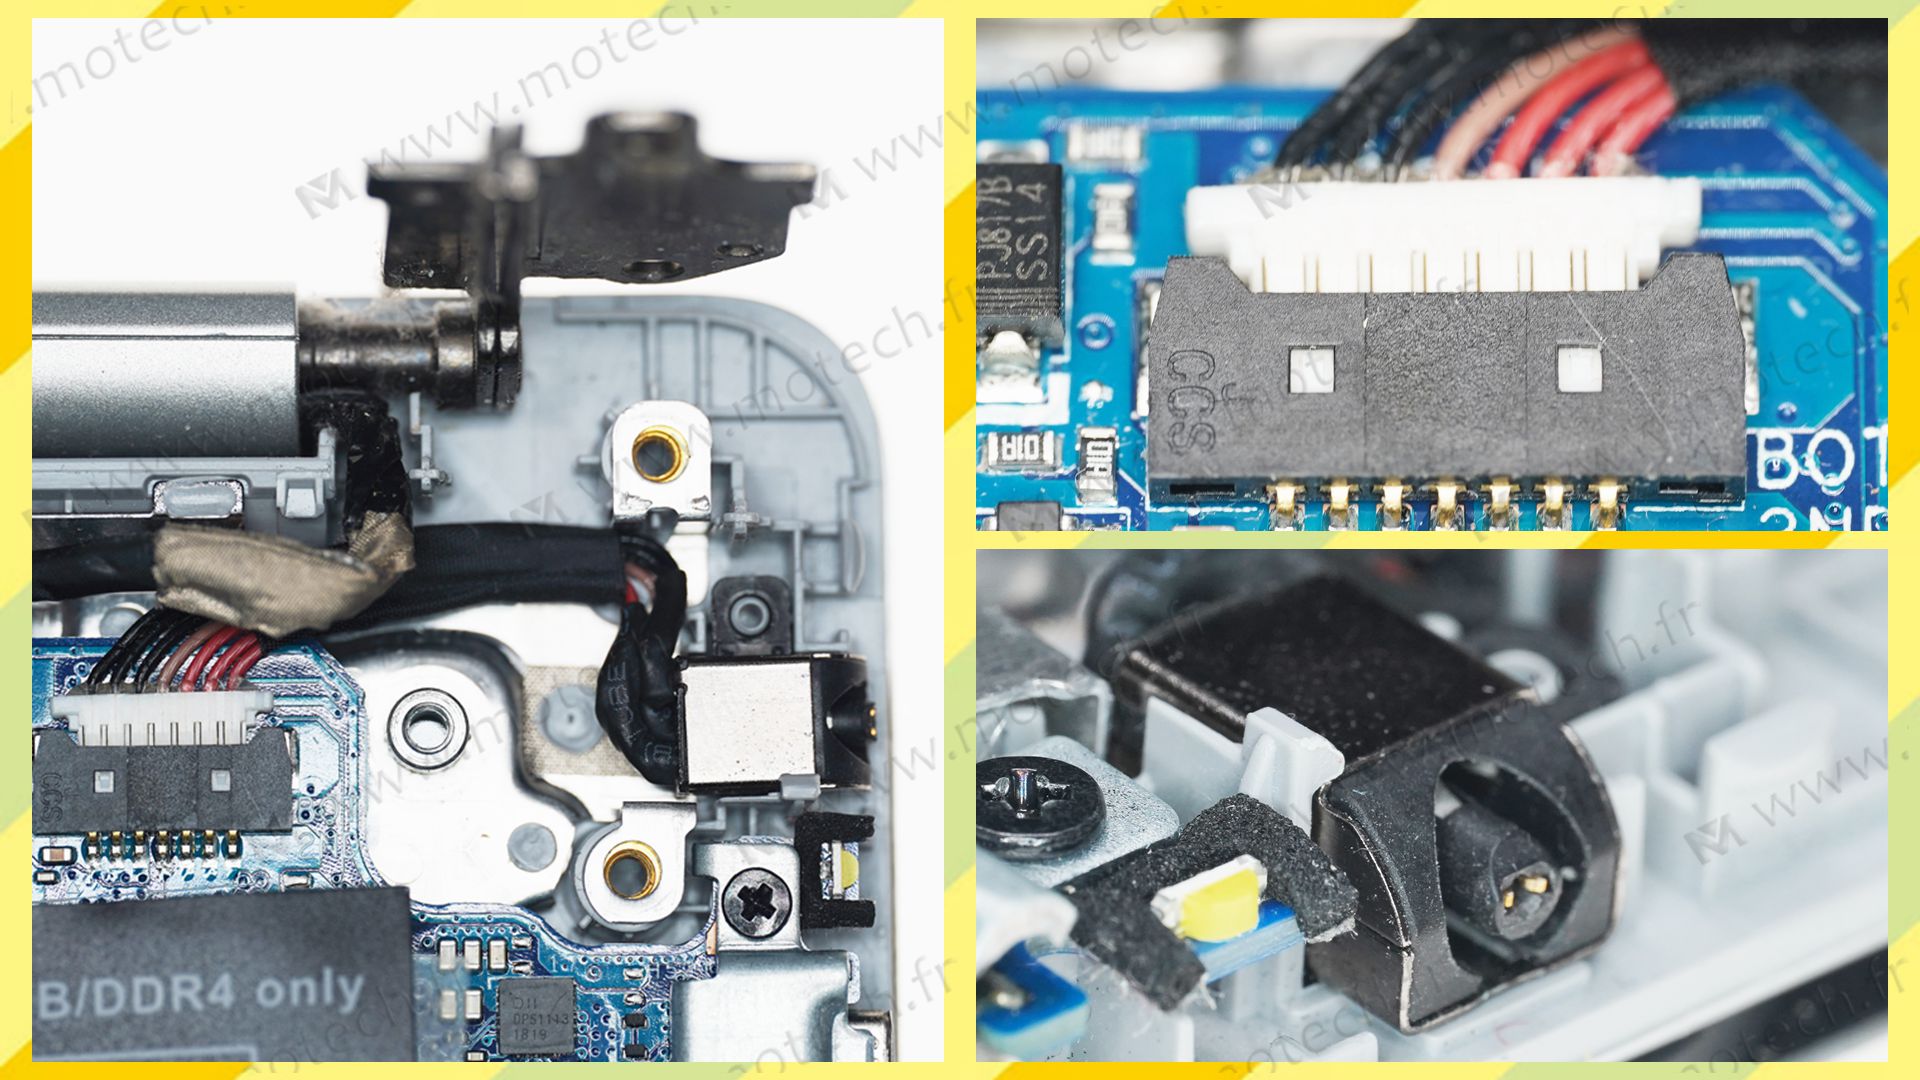 repair charging connector Dell 5370 P87G001 Vostro, repair DC Power Jack Dell 5370 P87G001 Vostro, repair DC IN Cable Dell 5370 P87G001 Vostro, repair Jack socket Dell 5370 P87G001 Vostro, repair plug Dell 5370 P87G001 Vostro, repair DC Alimantation Dell 5370 P87G001 Vostro, replace charging connector Dell 5370 P87G001 Vostro, replace DC Power Jack Dell 5370 P87G001 Vostro, replace DC IN Cable Dell 5370 P87G001 Vostro, replace Jack socket Dell 5370 P87G001 Vostro, replace plug Dell 5370 P87G001 Vostro, replace DC Alimantation Dell 5370 P87G001 Vostro,